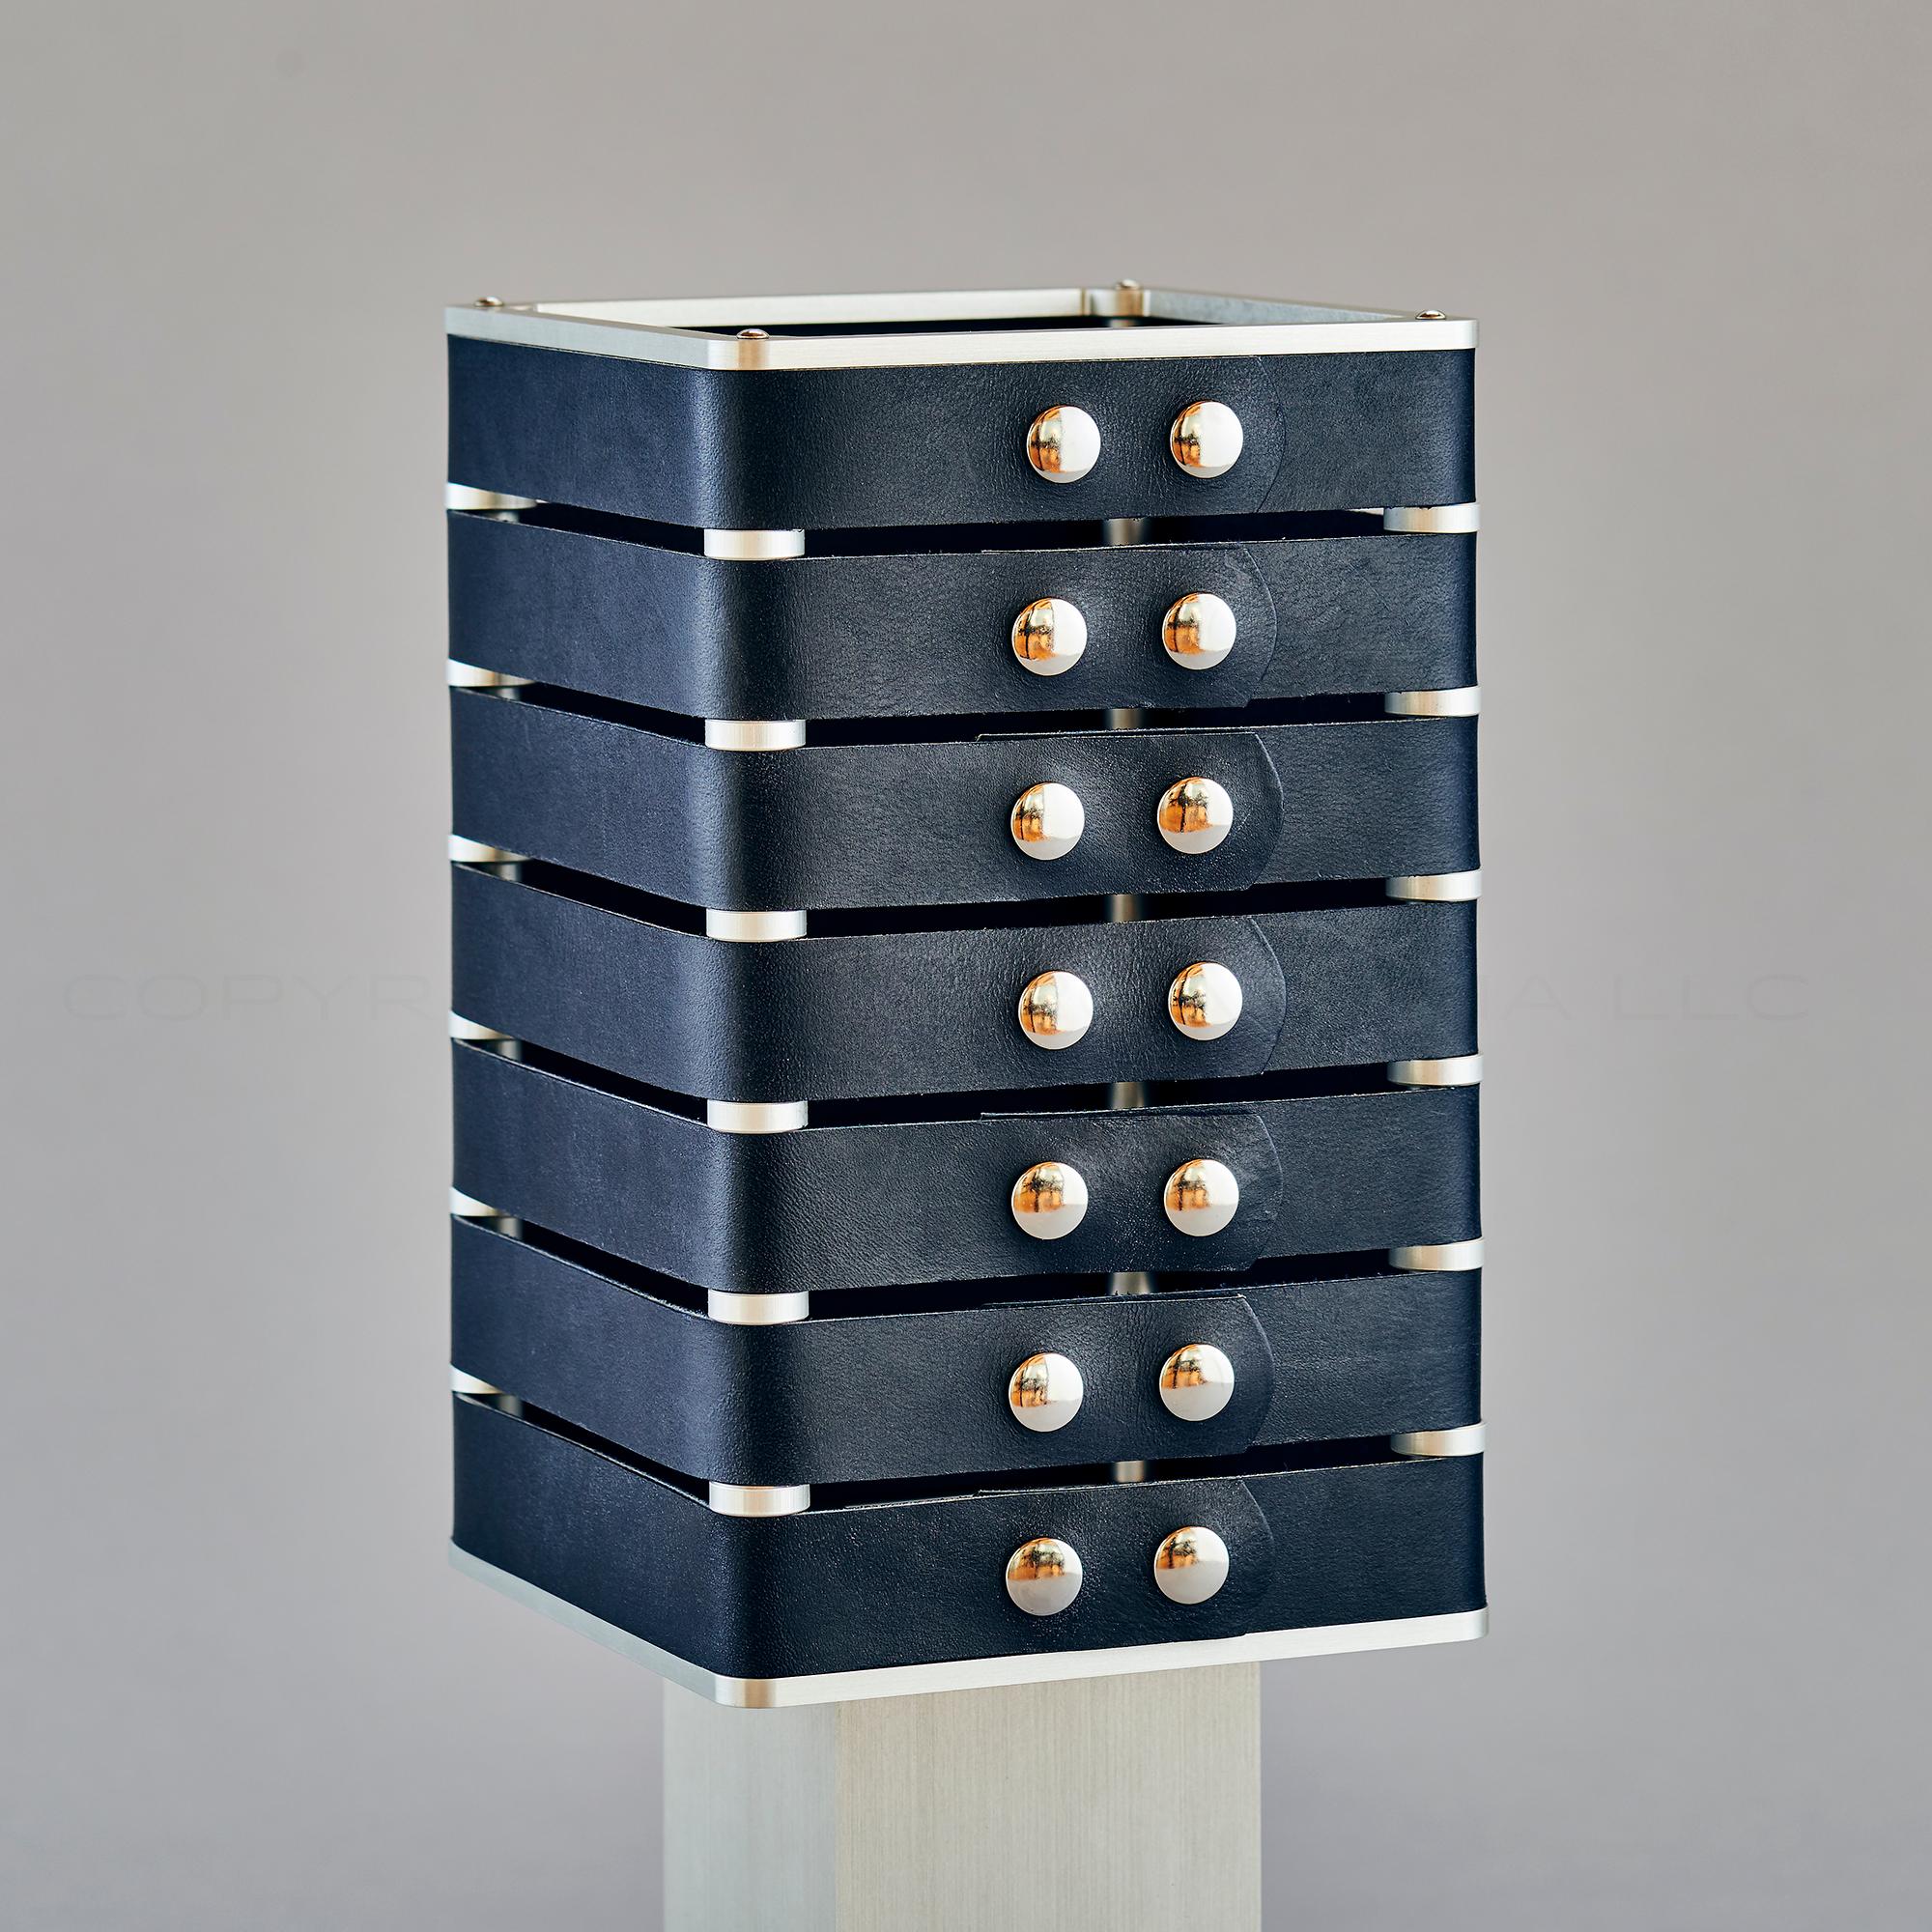 Contemporary Modern, Minimal, Solid Metal Table Light in Navy Blue Italian Leather